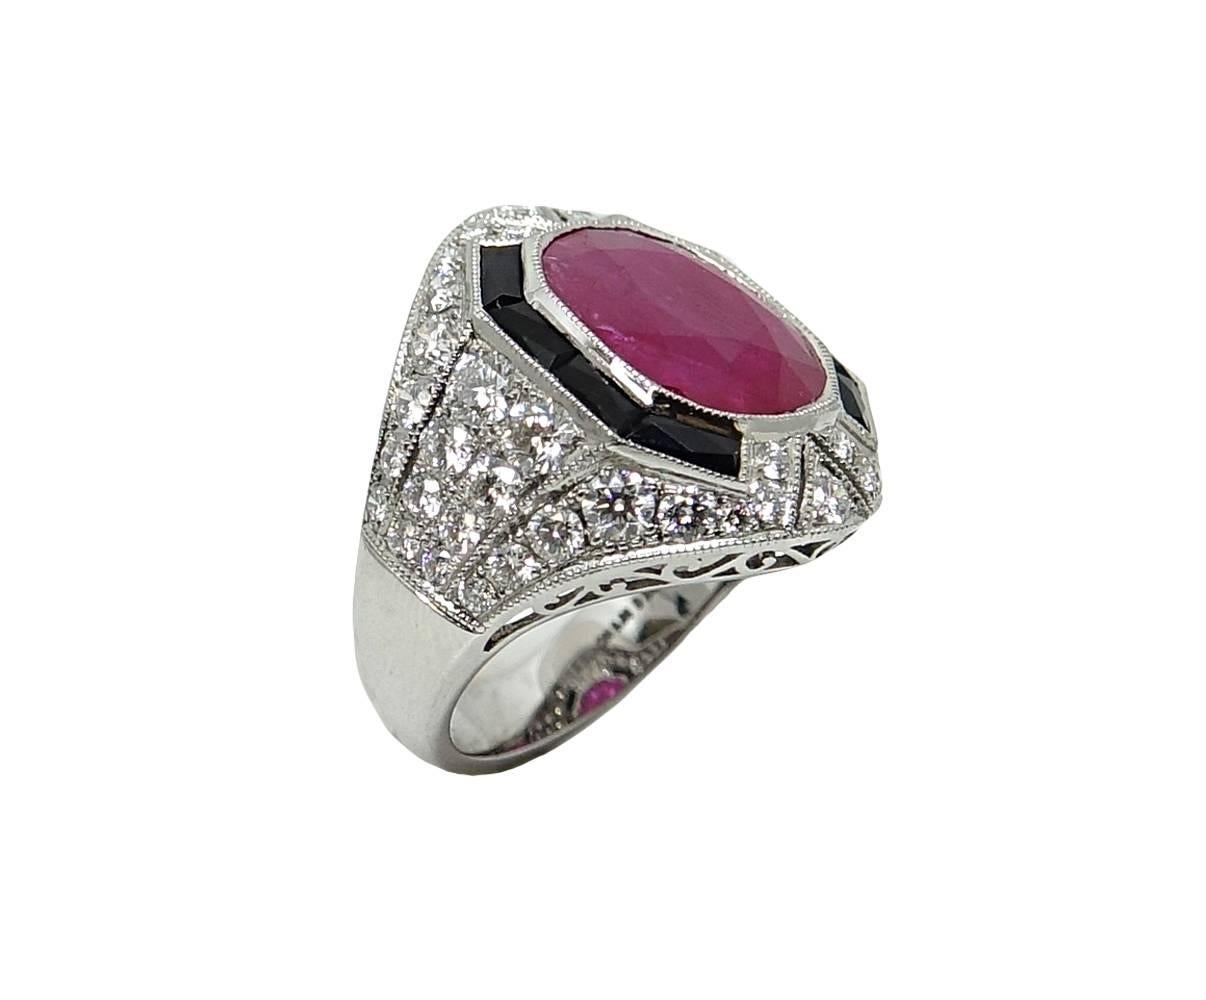 This Classic Style Platinum Ring Has A Center Cushion Cut Ruby Weighing A Total Carat Weight Of 5.72. (GAL Report #: 201603978) Round Diamonds Cover The Mounting Of The Ring and Weigh A Total Carat Weight Of 2.07 Carats, G-H Color and VS2-SI1 In